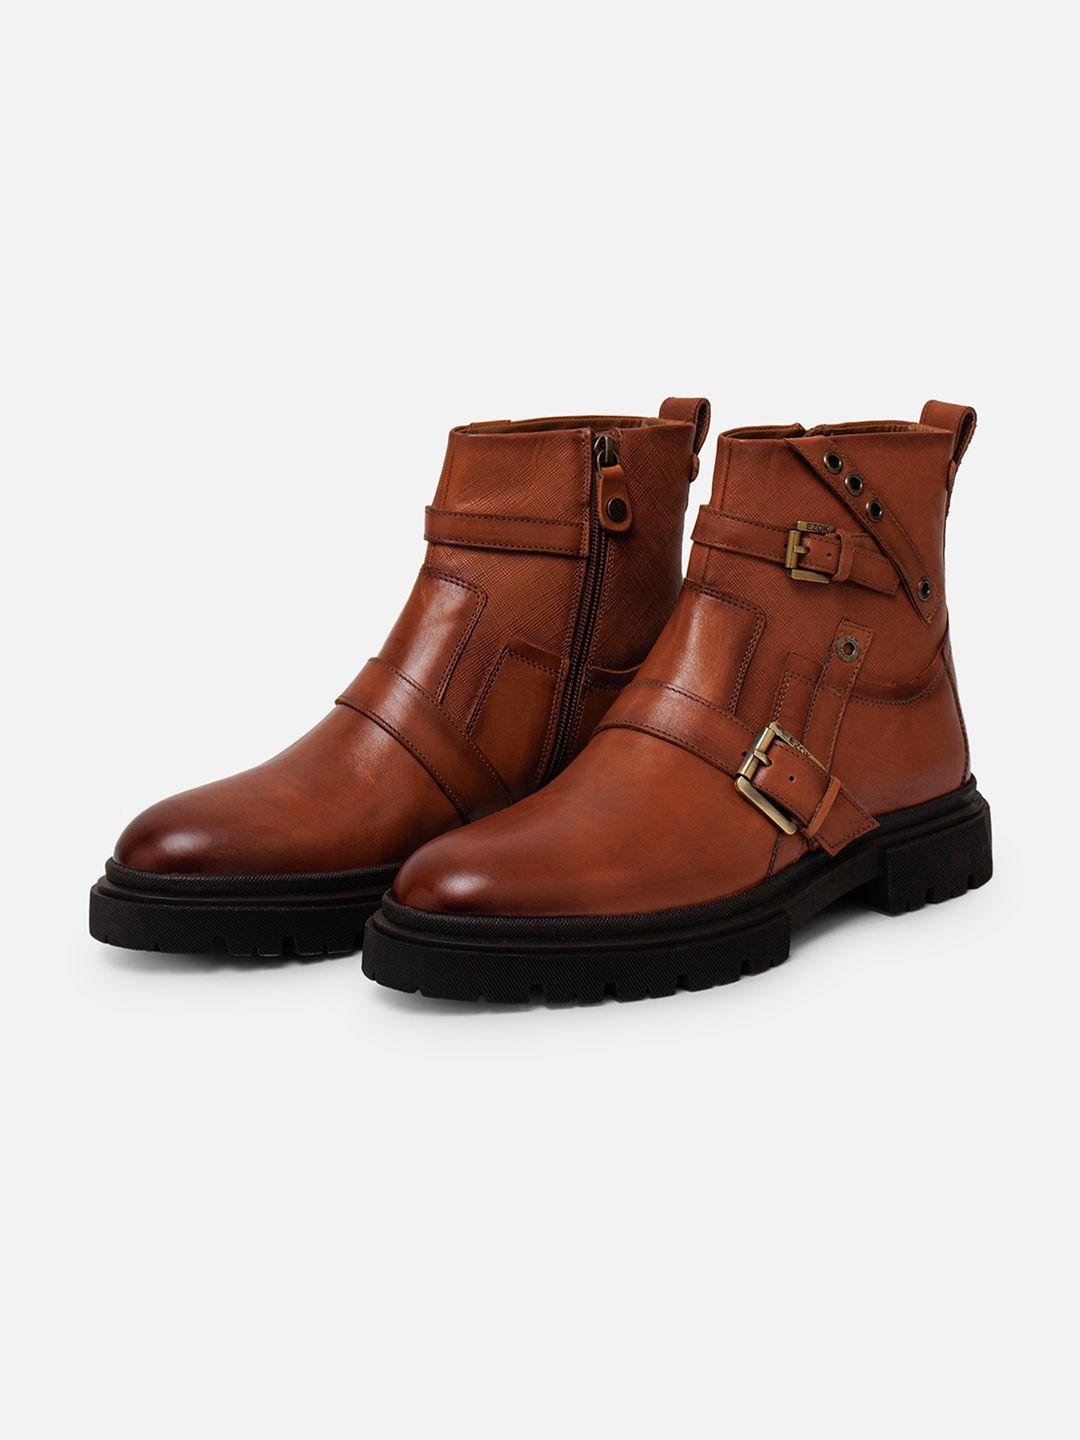 ezok men mid top leather regular boots with buckle detail